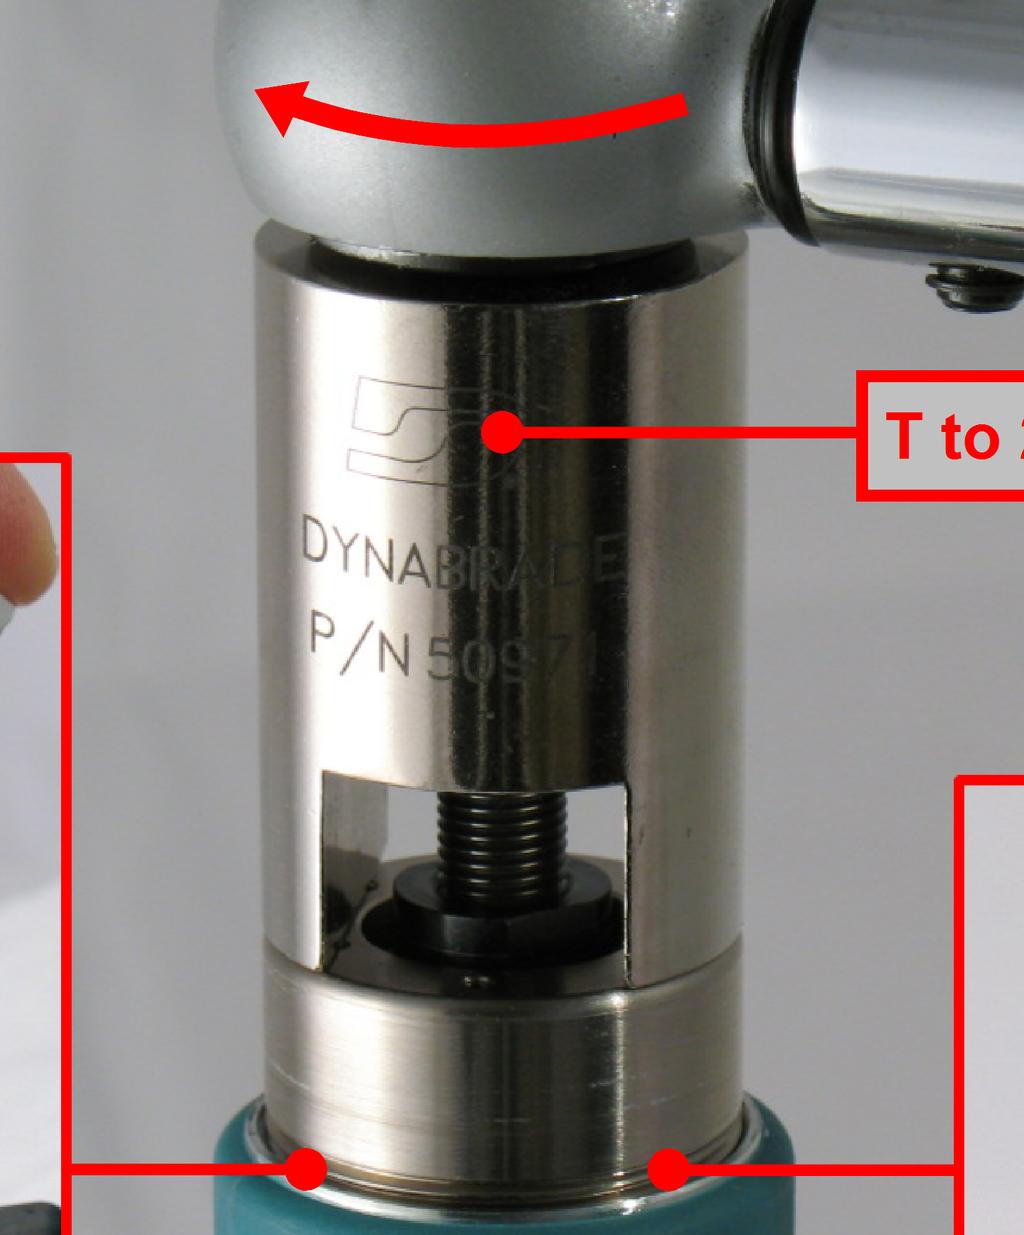 Apply a small amount of Loctite #567 or equivalent the 04087 Lock